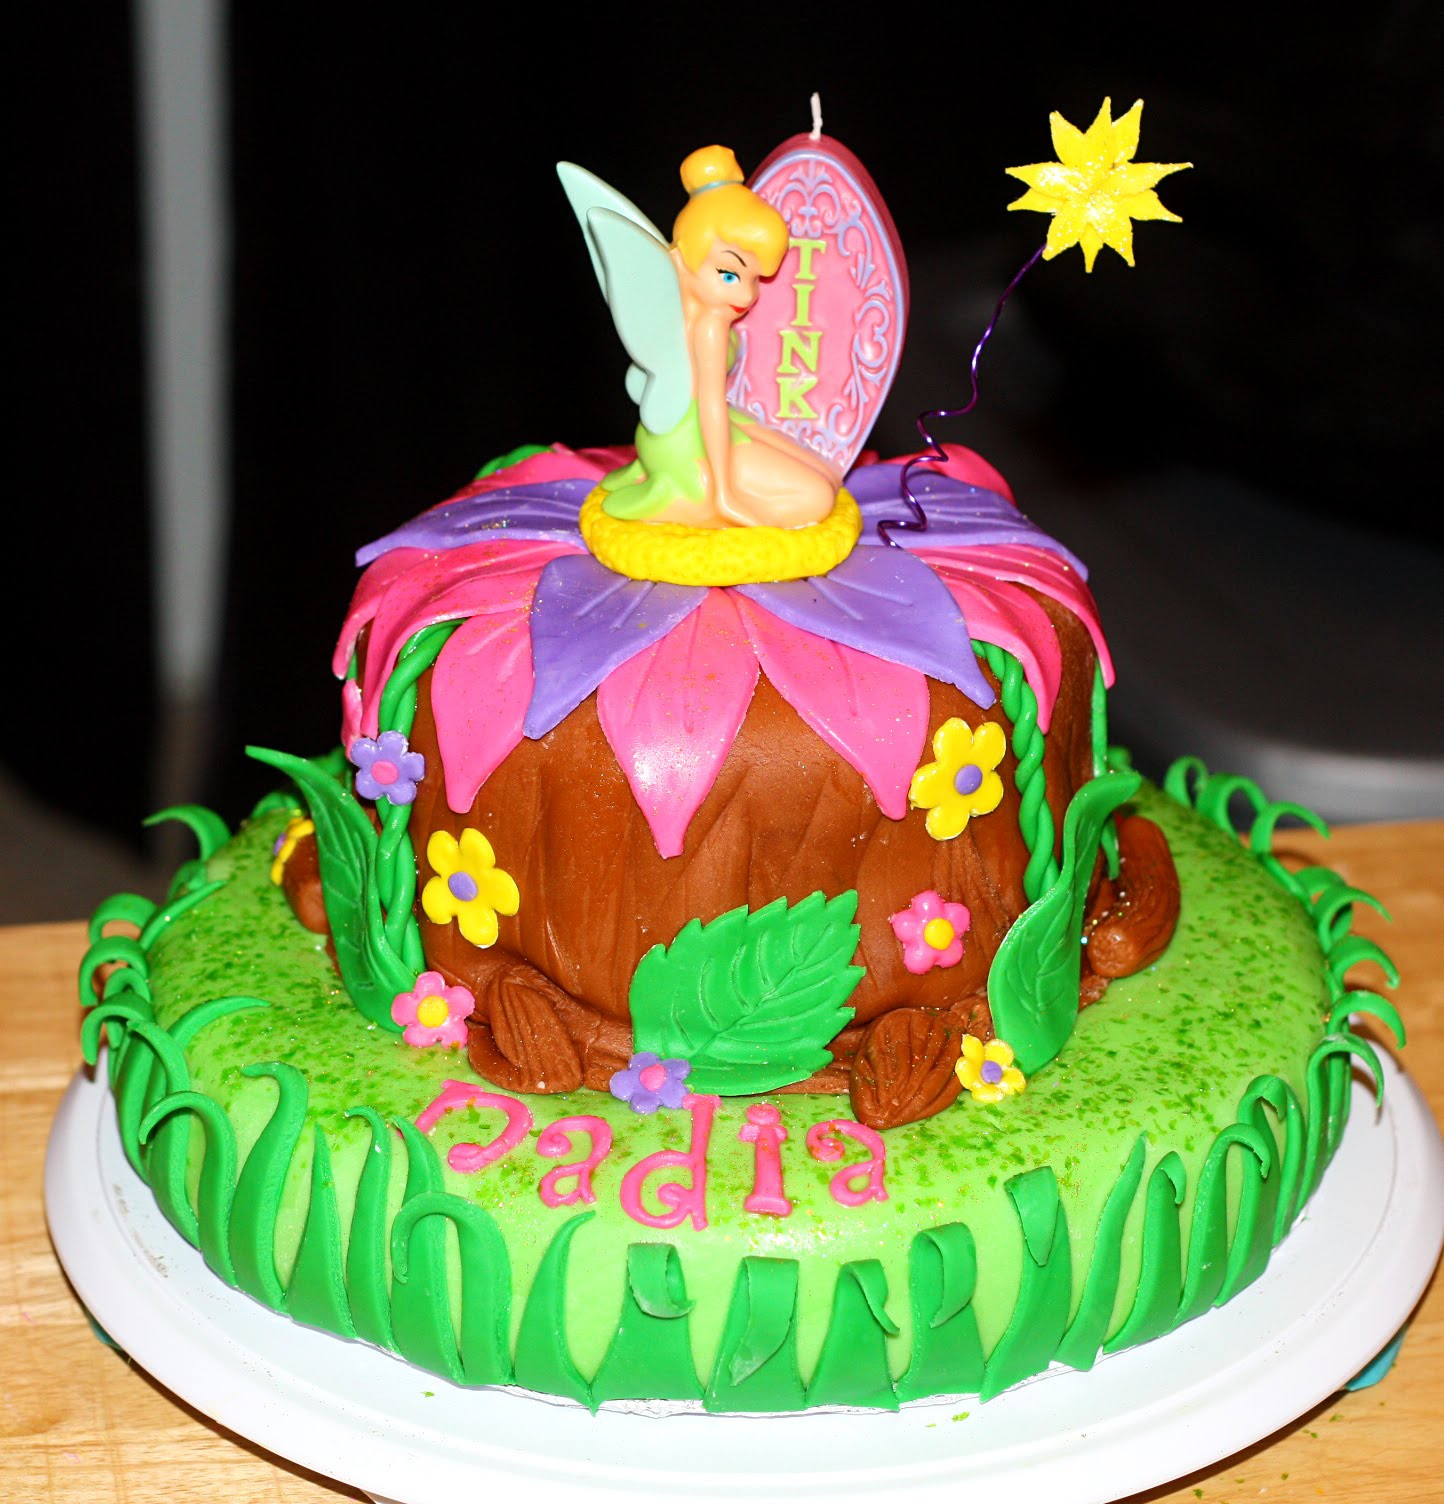 Tinkerbell Birthday Cakes
 Tinkerbell Birthday Cake Best Collections Cake Recipe